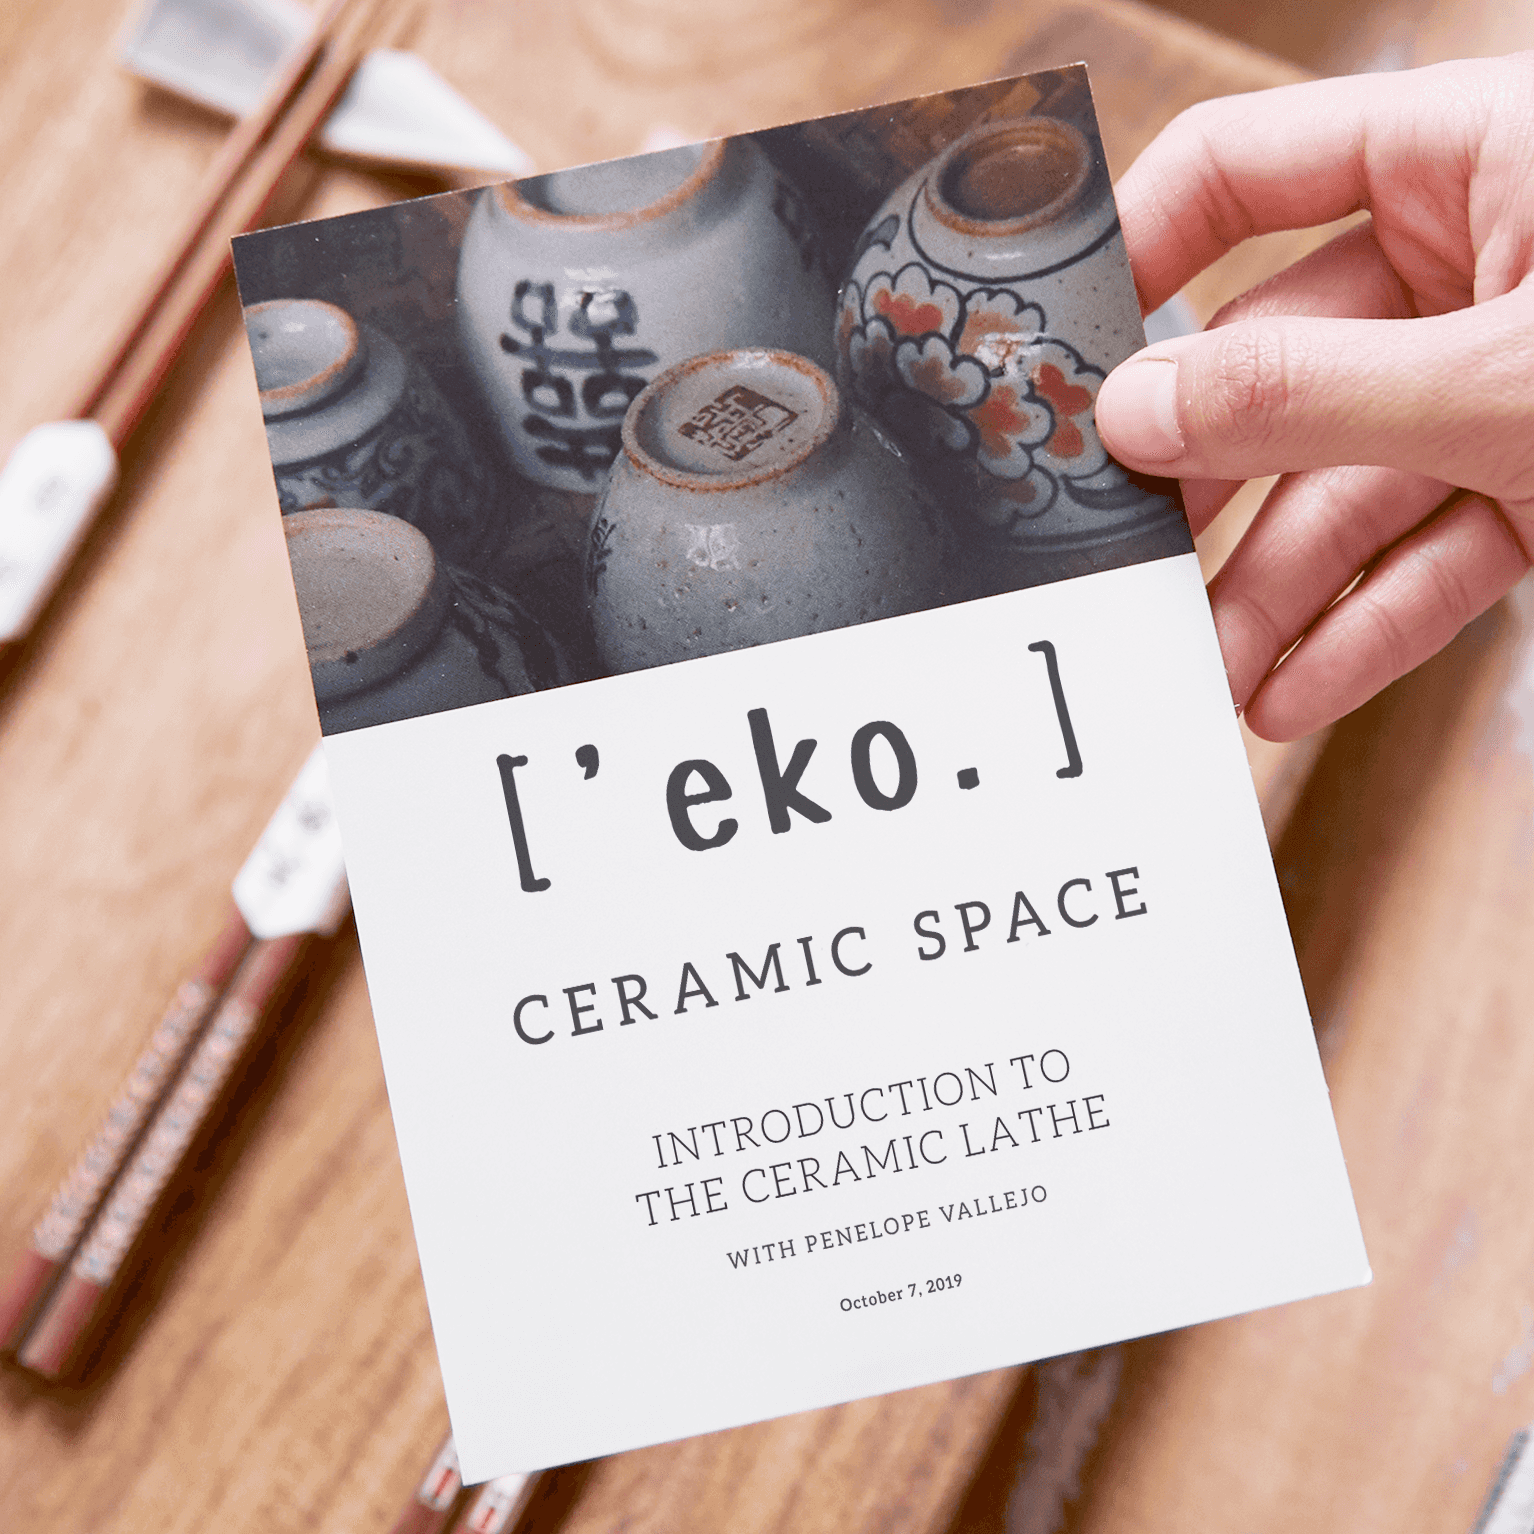 Hand holding a printed flyer for a ceramics business called 'eko. featuring photos of painted ceramic bowls.